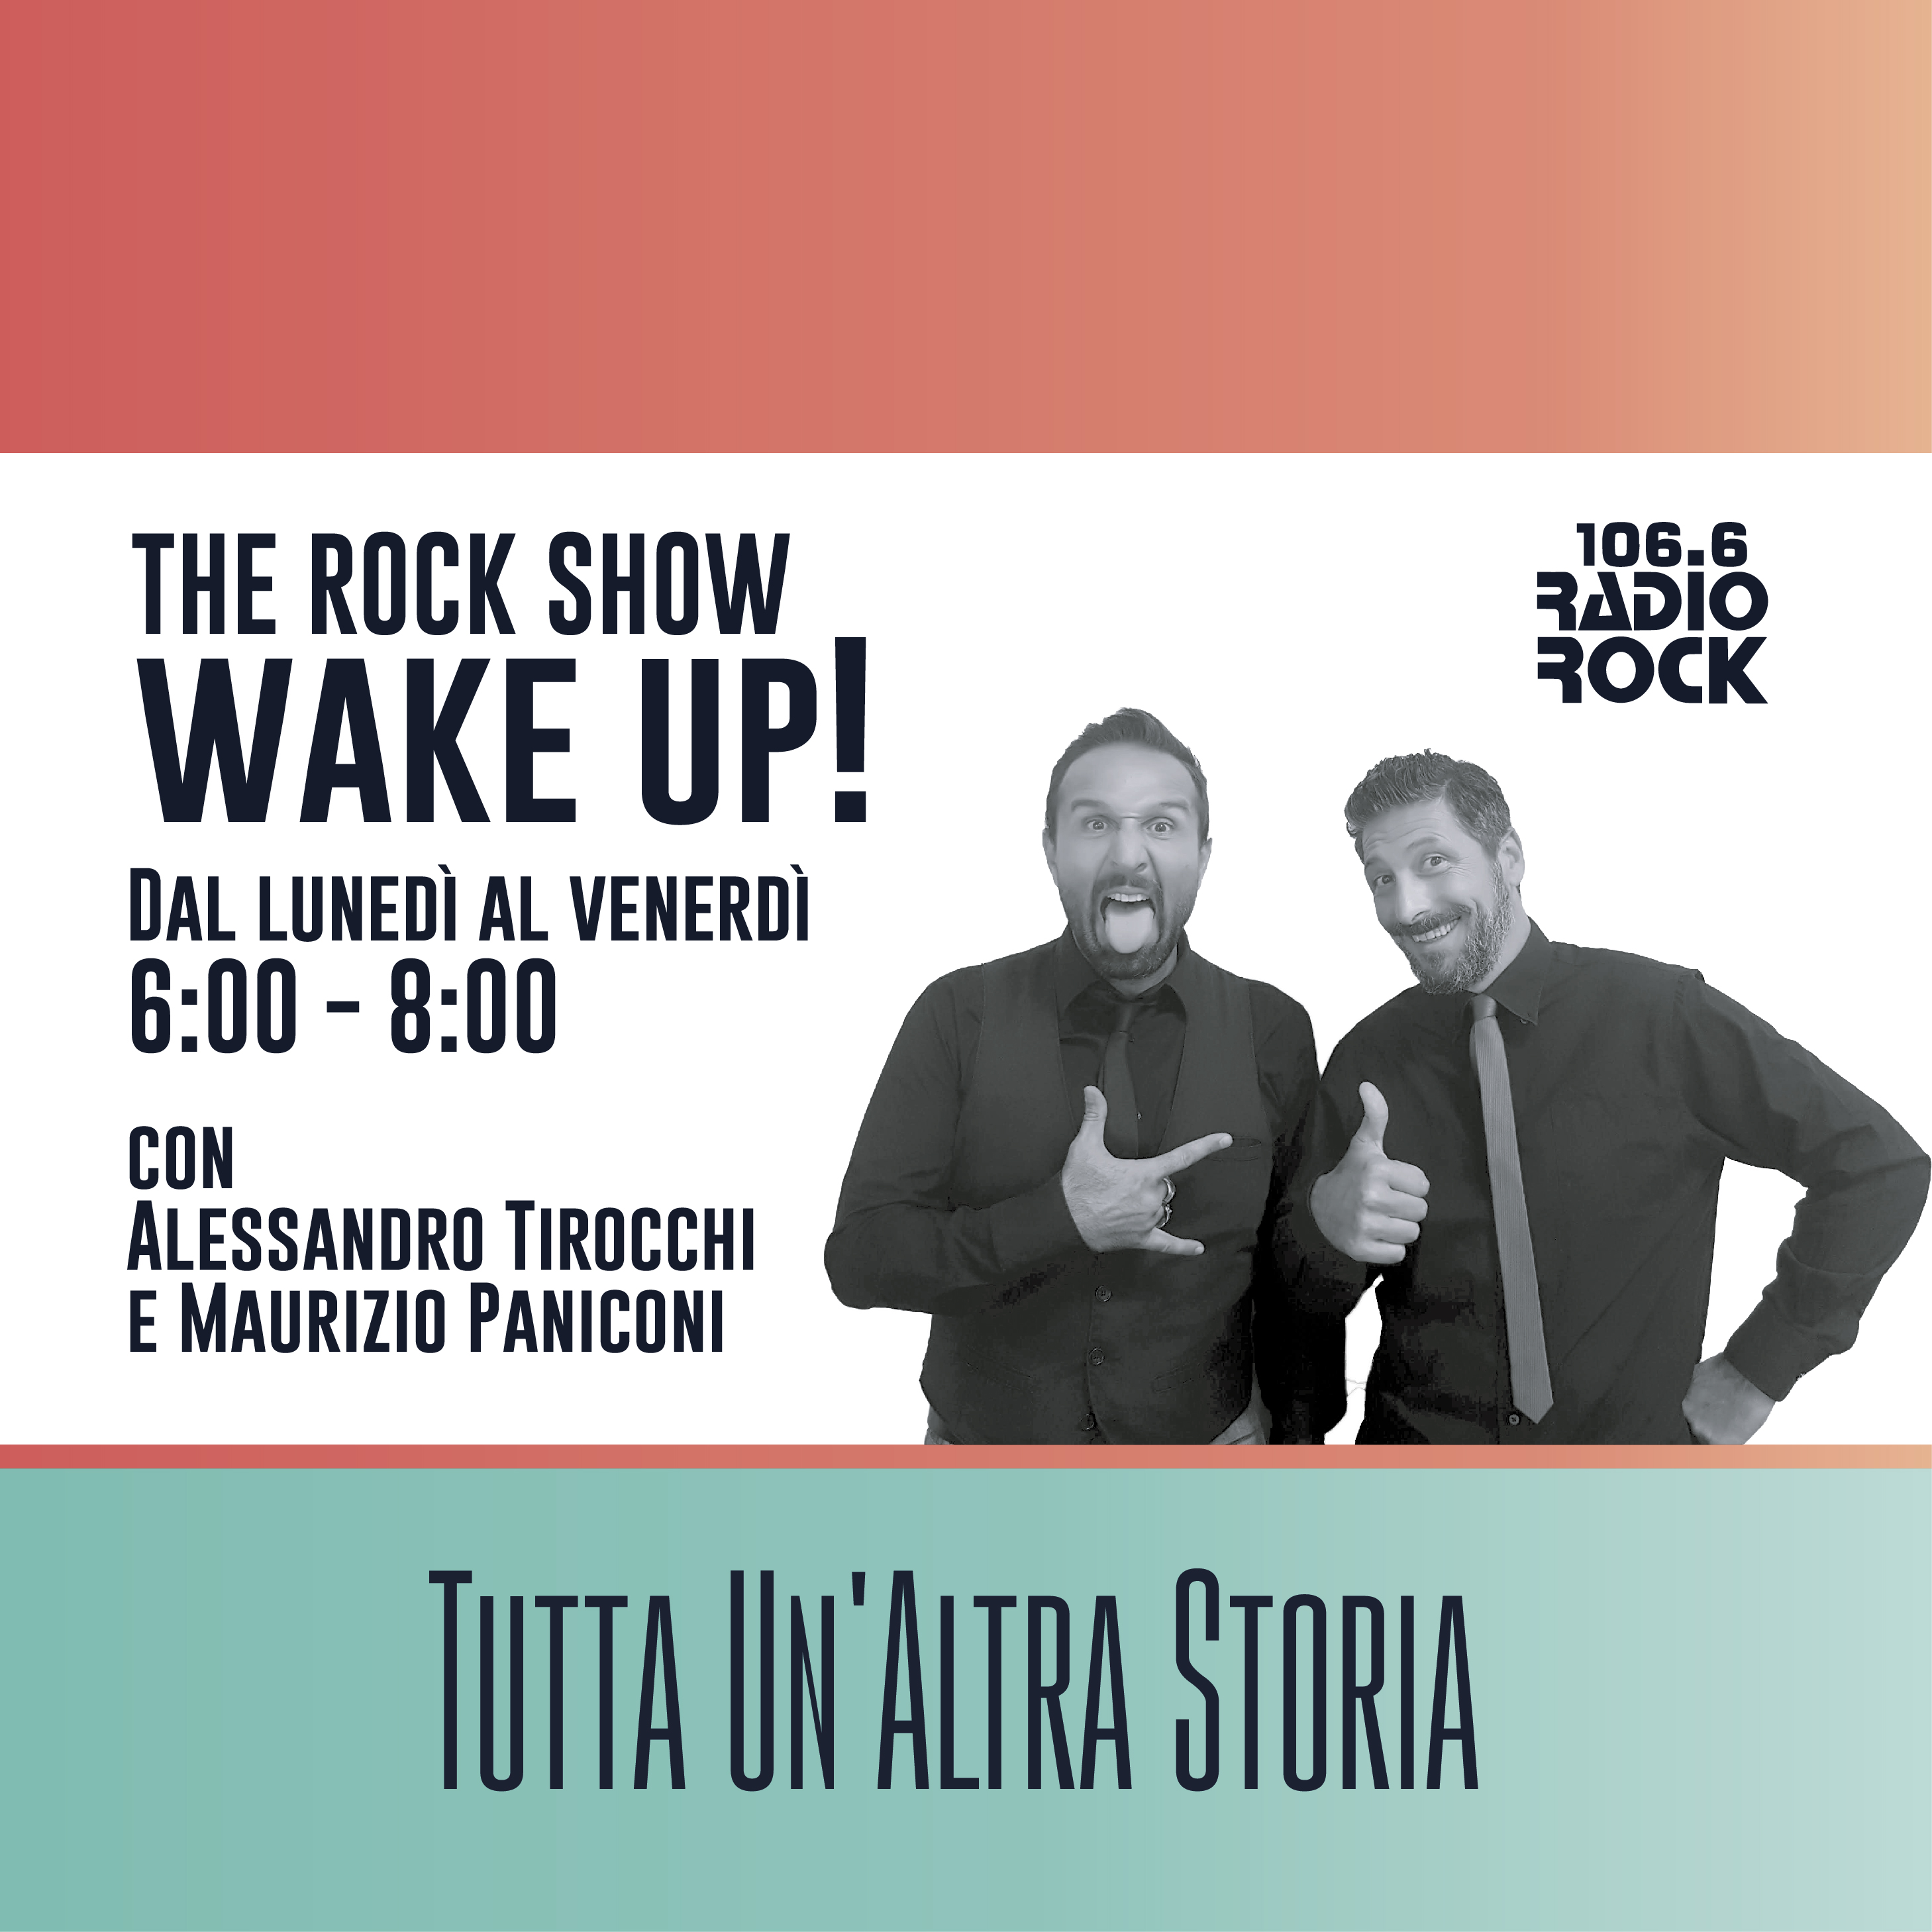 The Rock Show: Wake Up! (15-12-20)